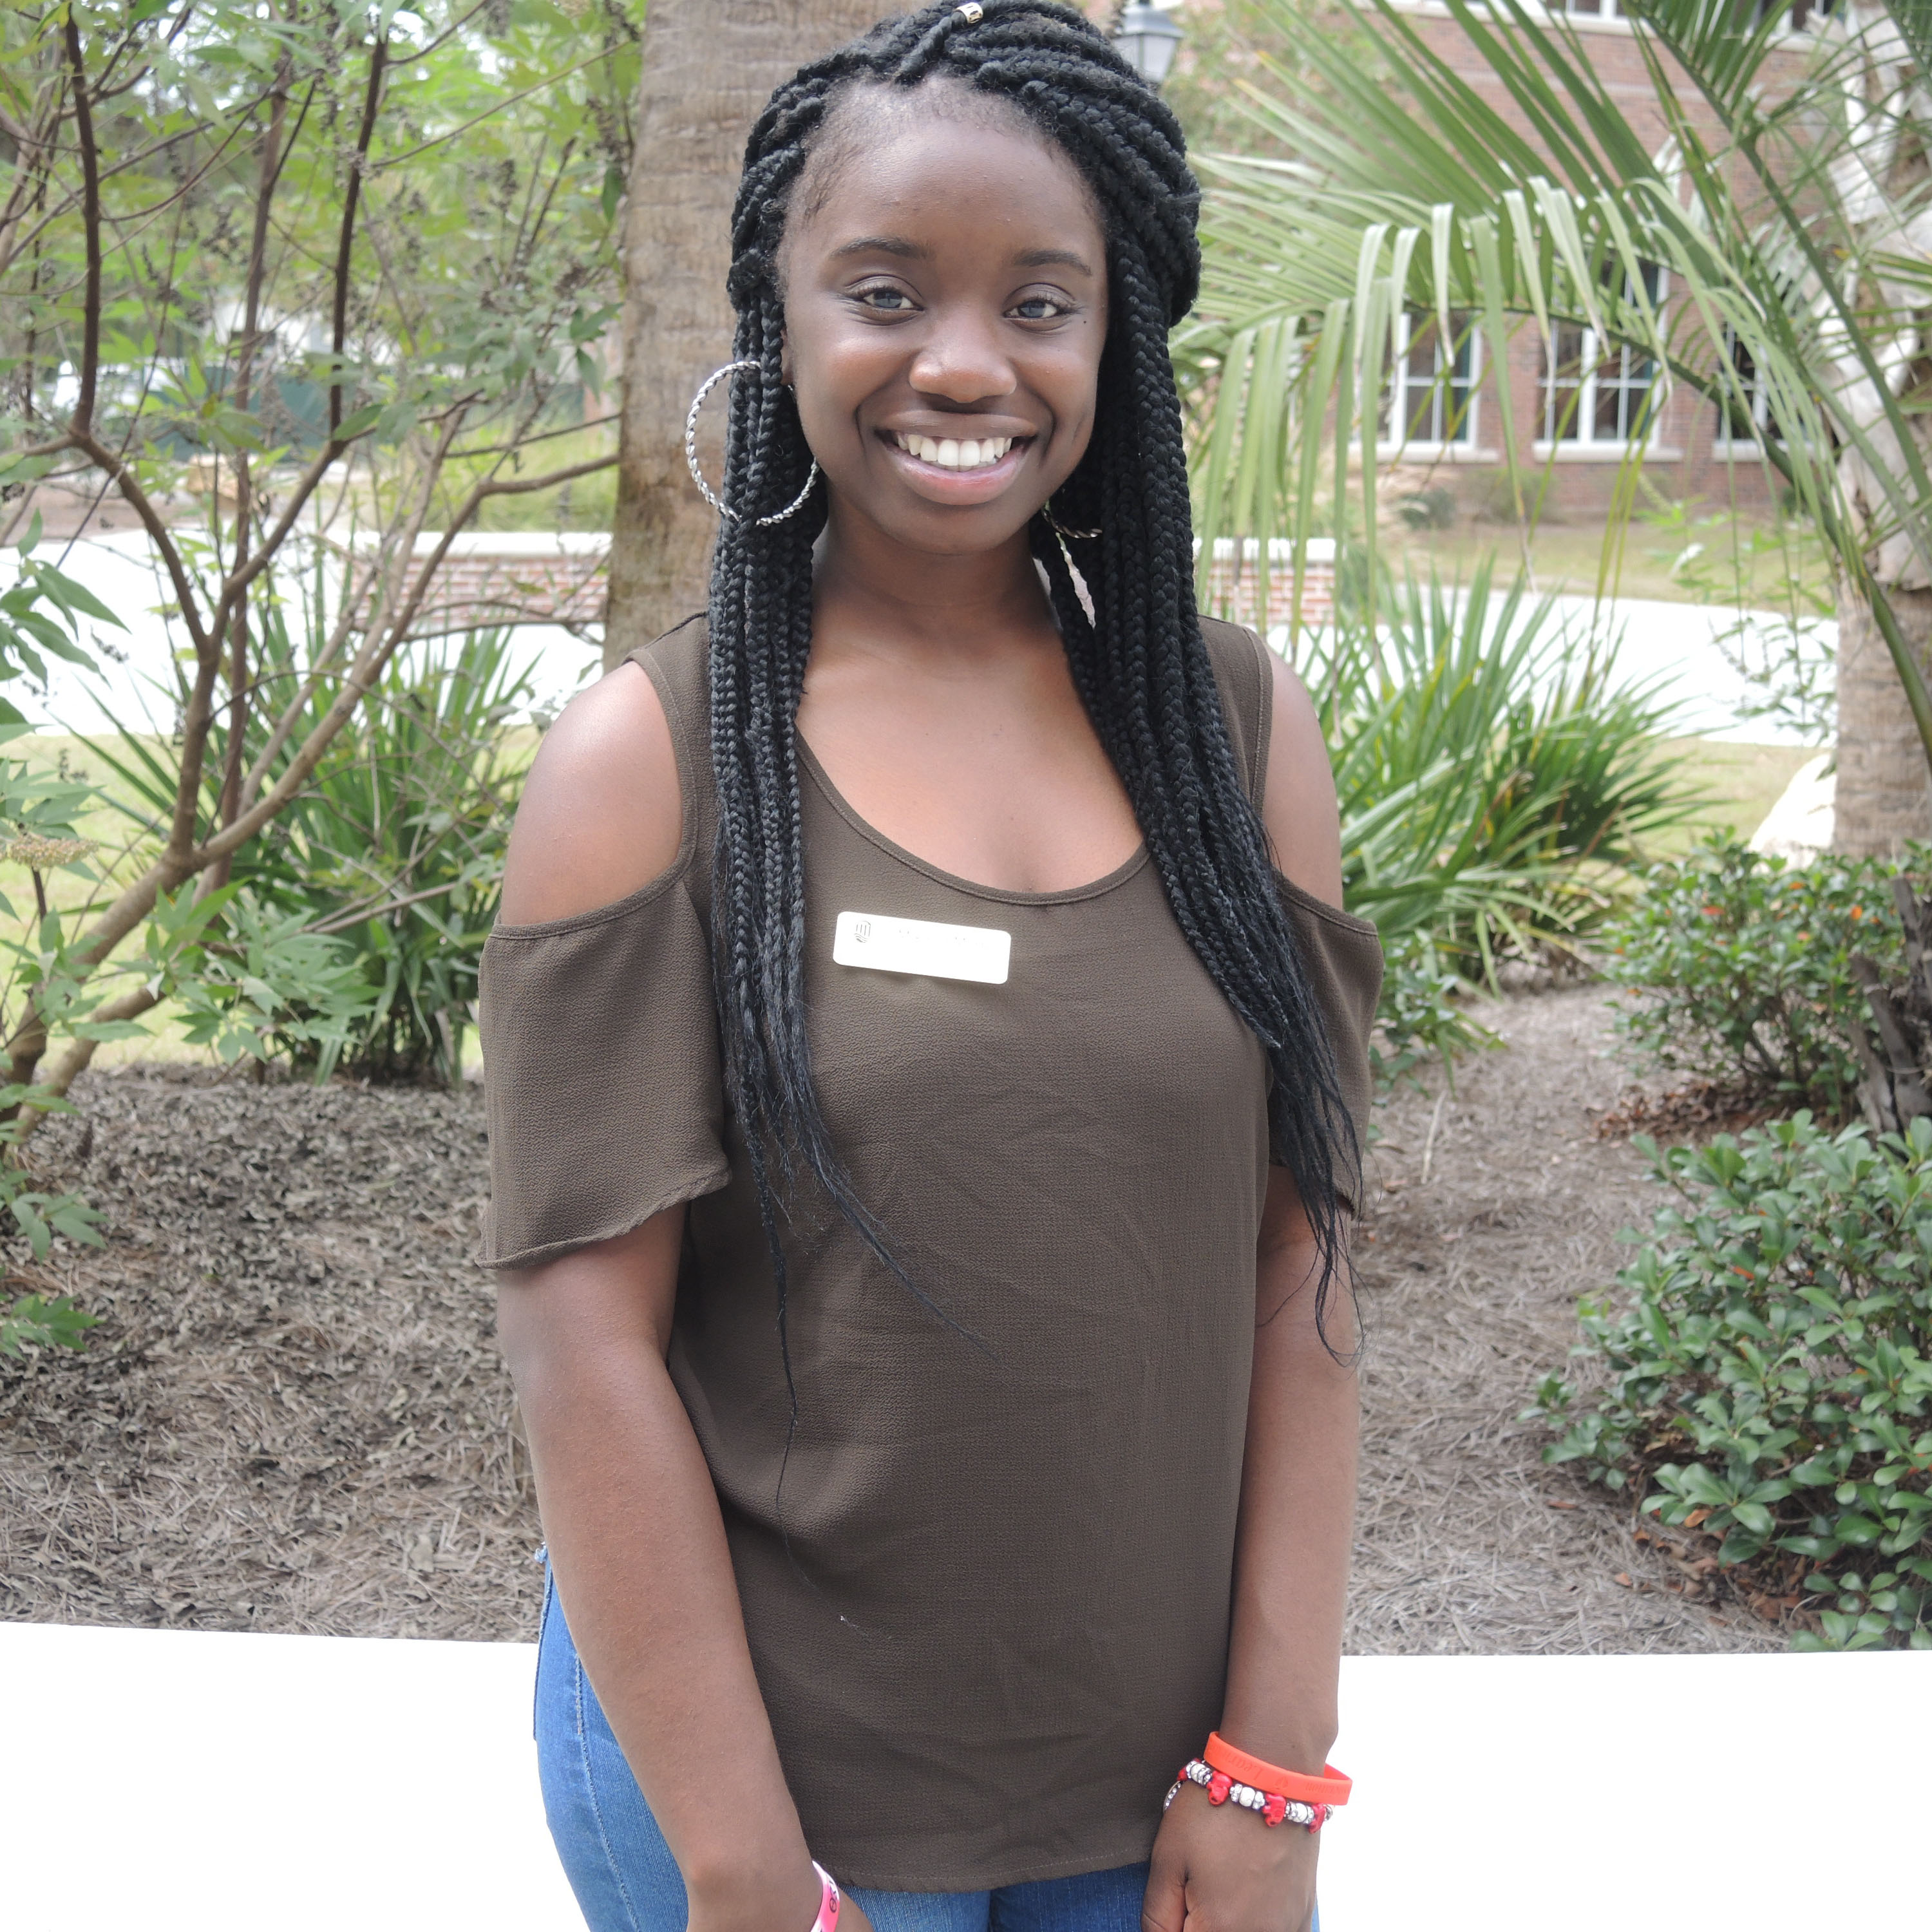 Mikayla is vice president of the #CCU Women of Color group.